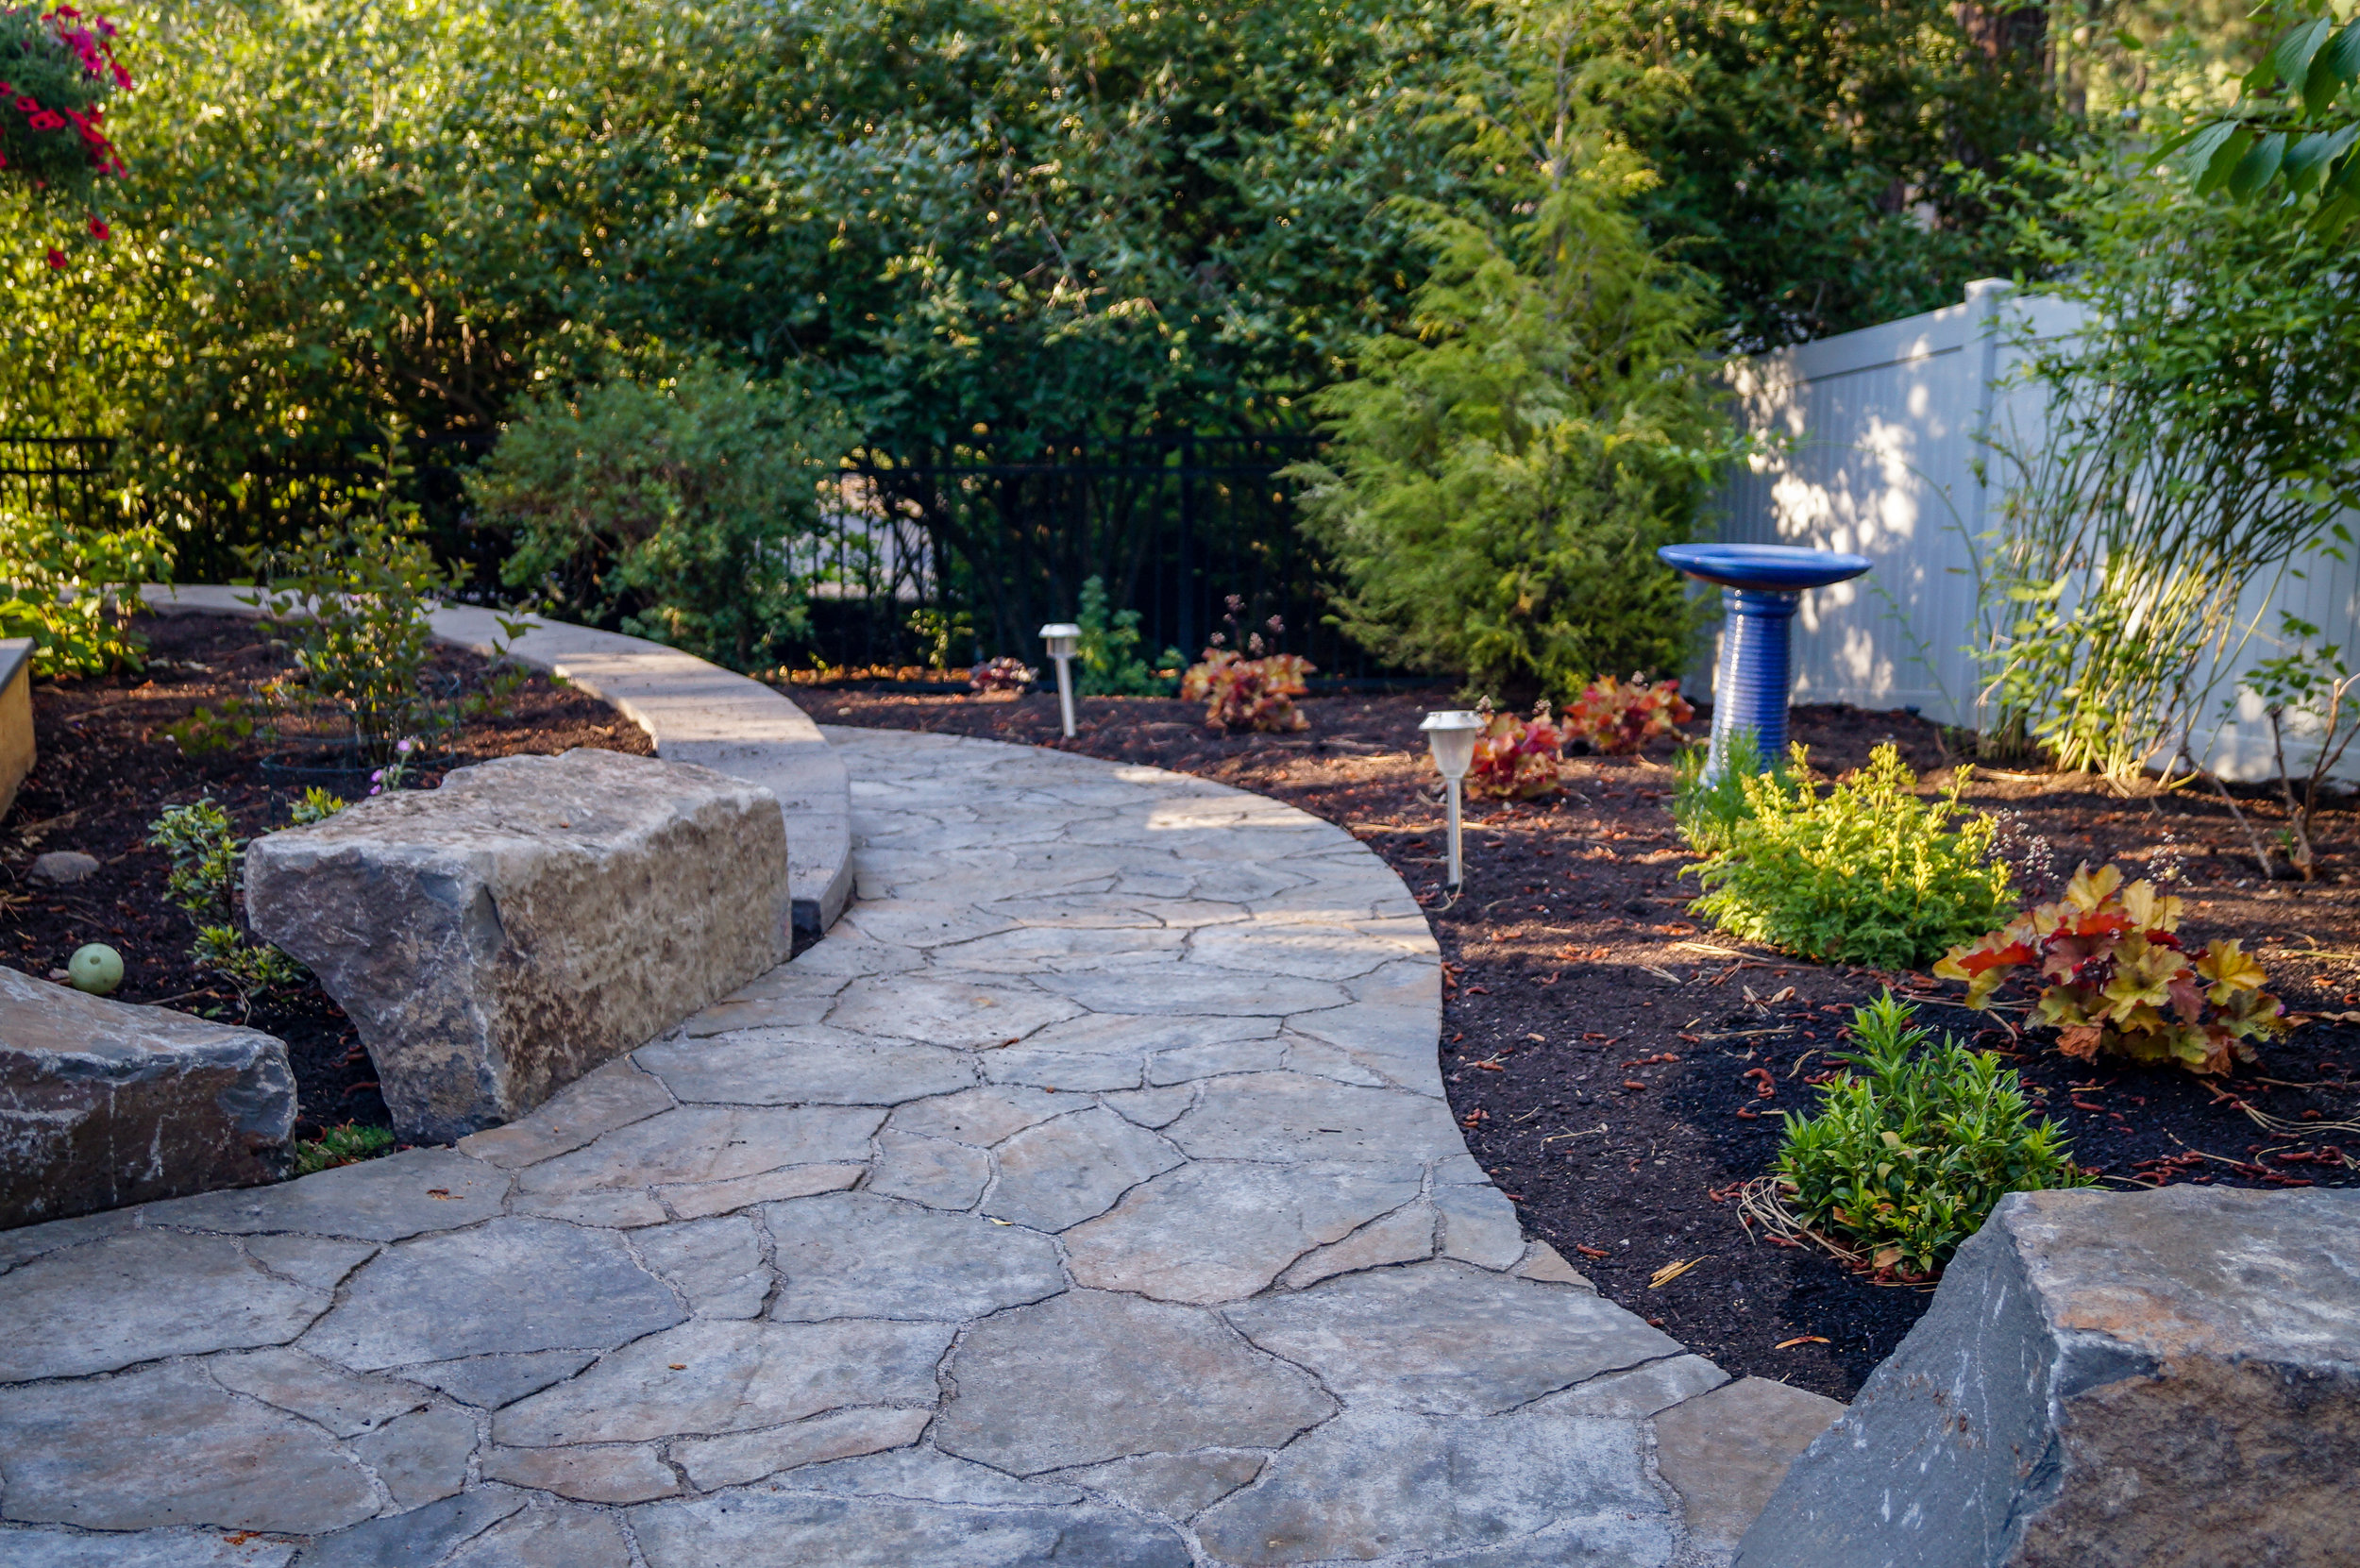 belgard mega arbel paver pathway around retaining wall and boulders with northwest landscaping